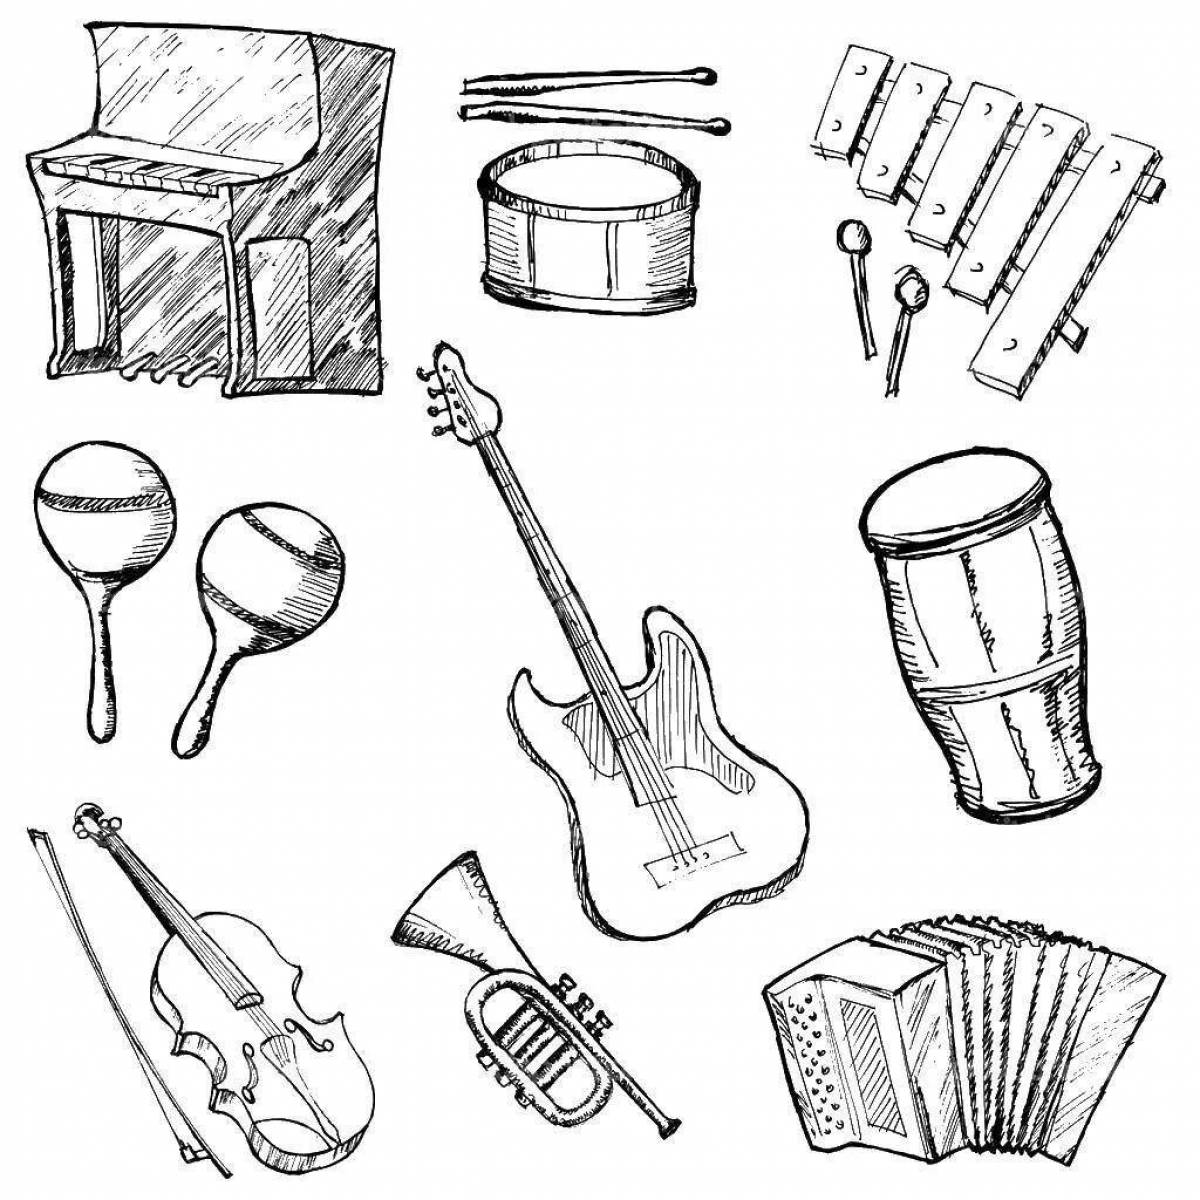 Exotic Russian folk musical instruments